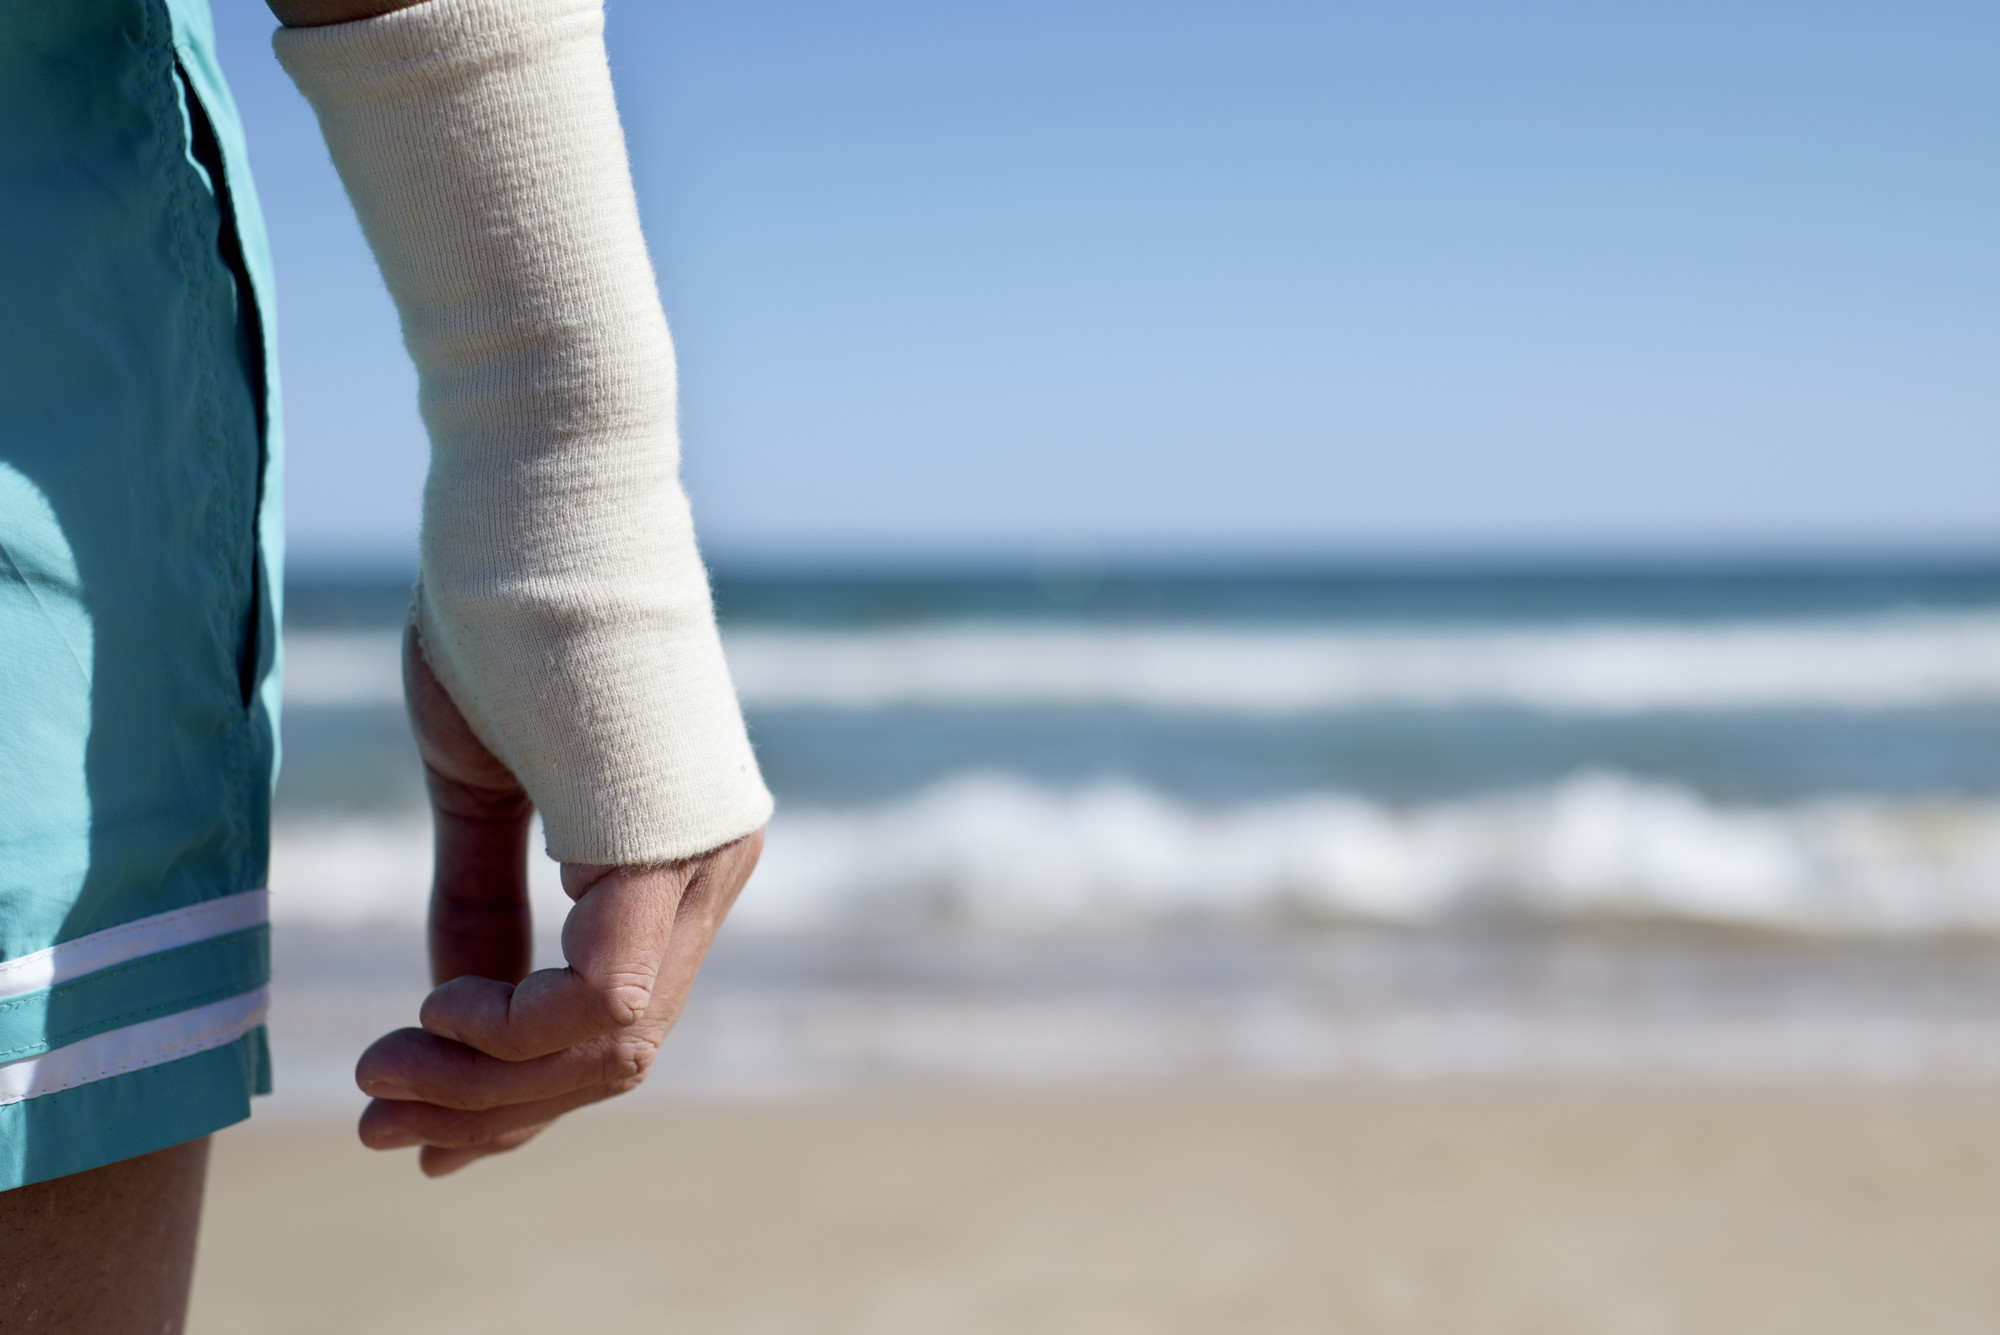 Common Spring Break Injuries and How to Avoid Them